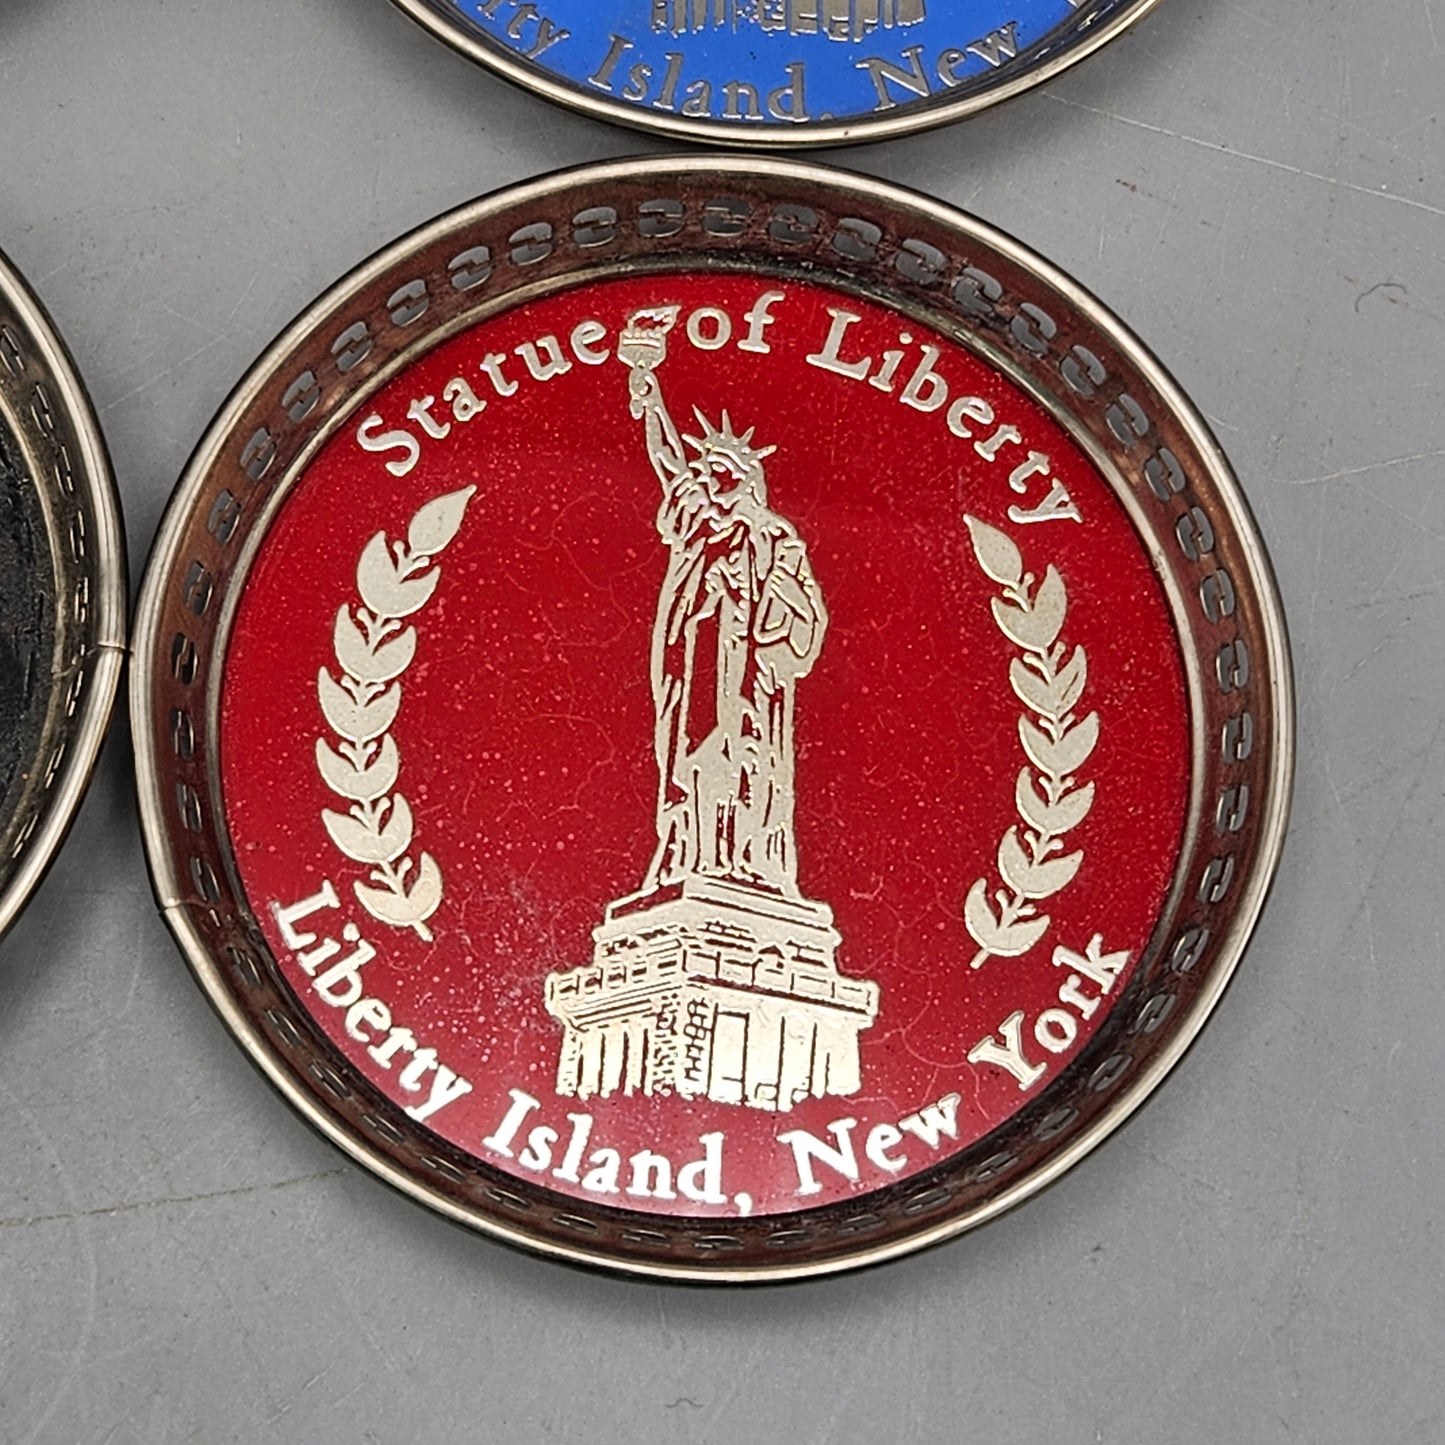 Set of 4 Vintage Statue of Liberty New York Coasters